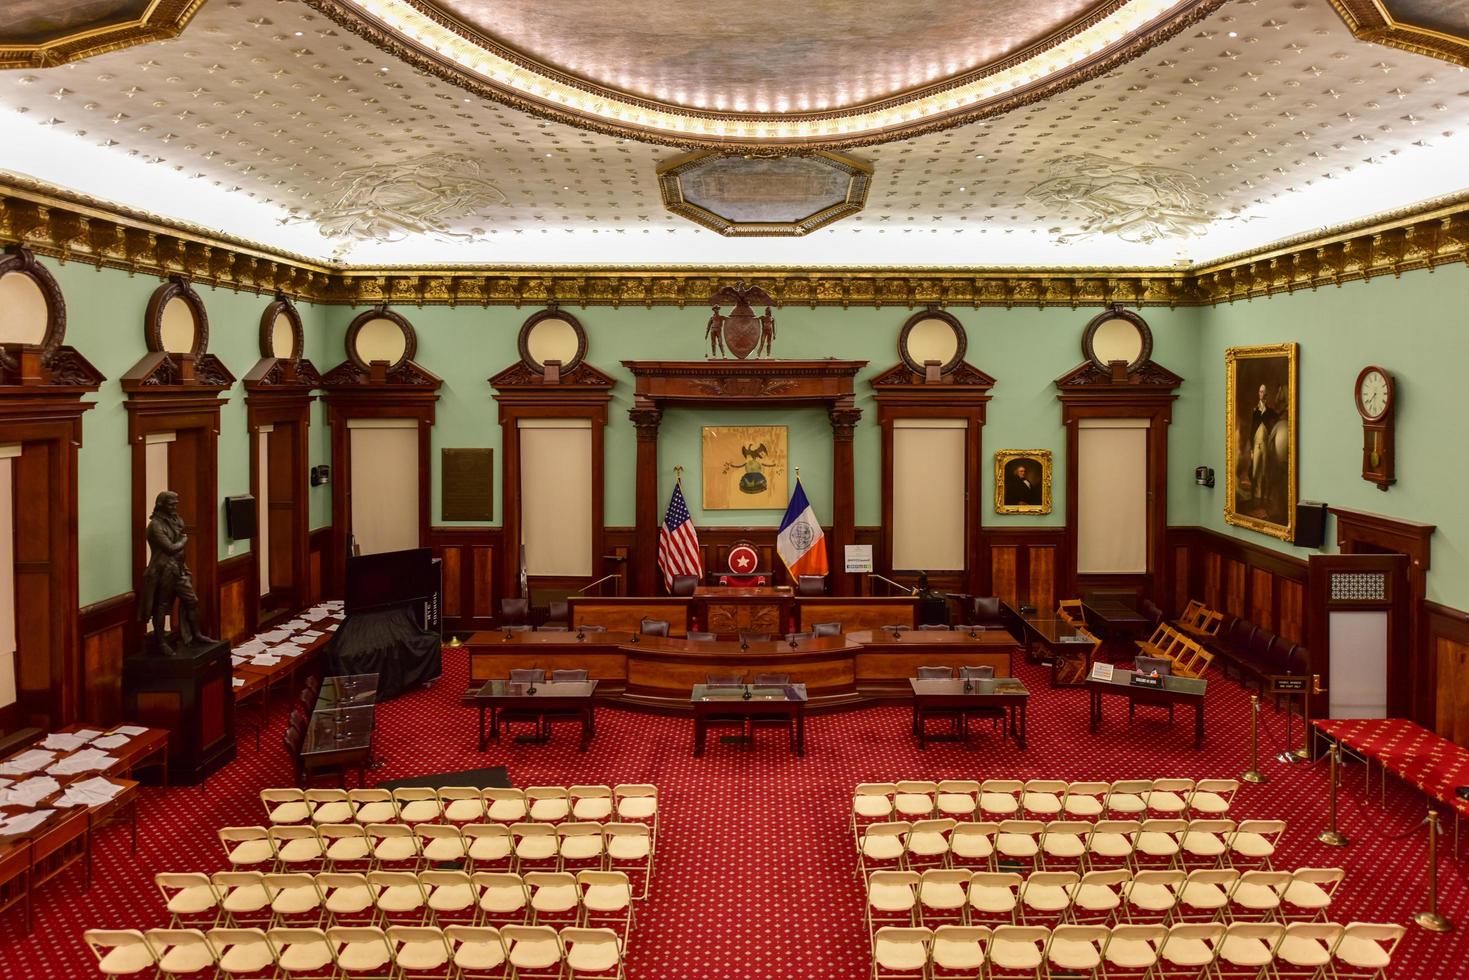 New York City - Mar 29 2017 -  The New York City Council in New York City Hall, the seat of NYC government, located at the center of City Hall Park in the Civic Center area of Lower Manhattan. photo